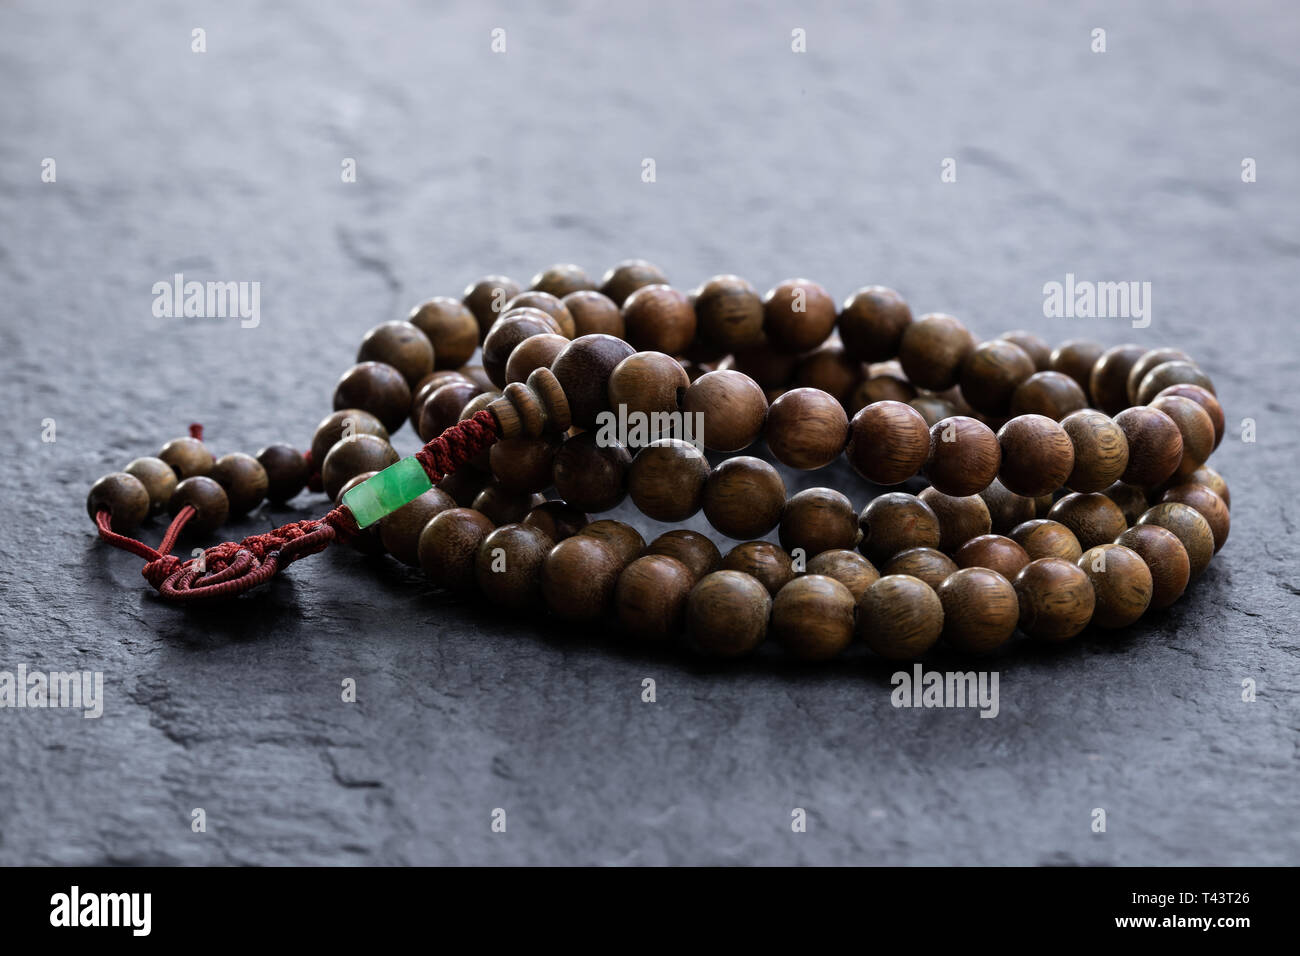 Female Hand Holding a Buddhist Japa Mala Made from 108 Natural